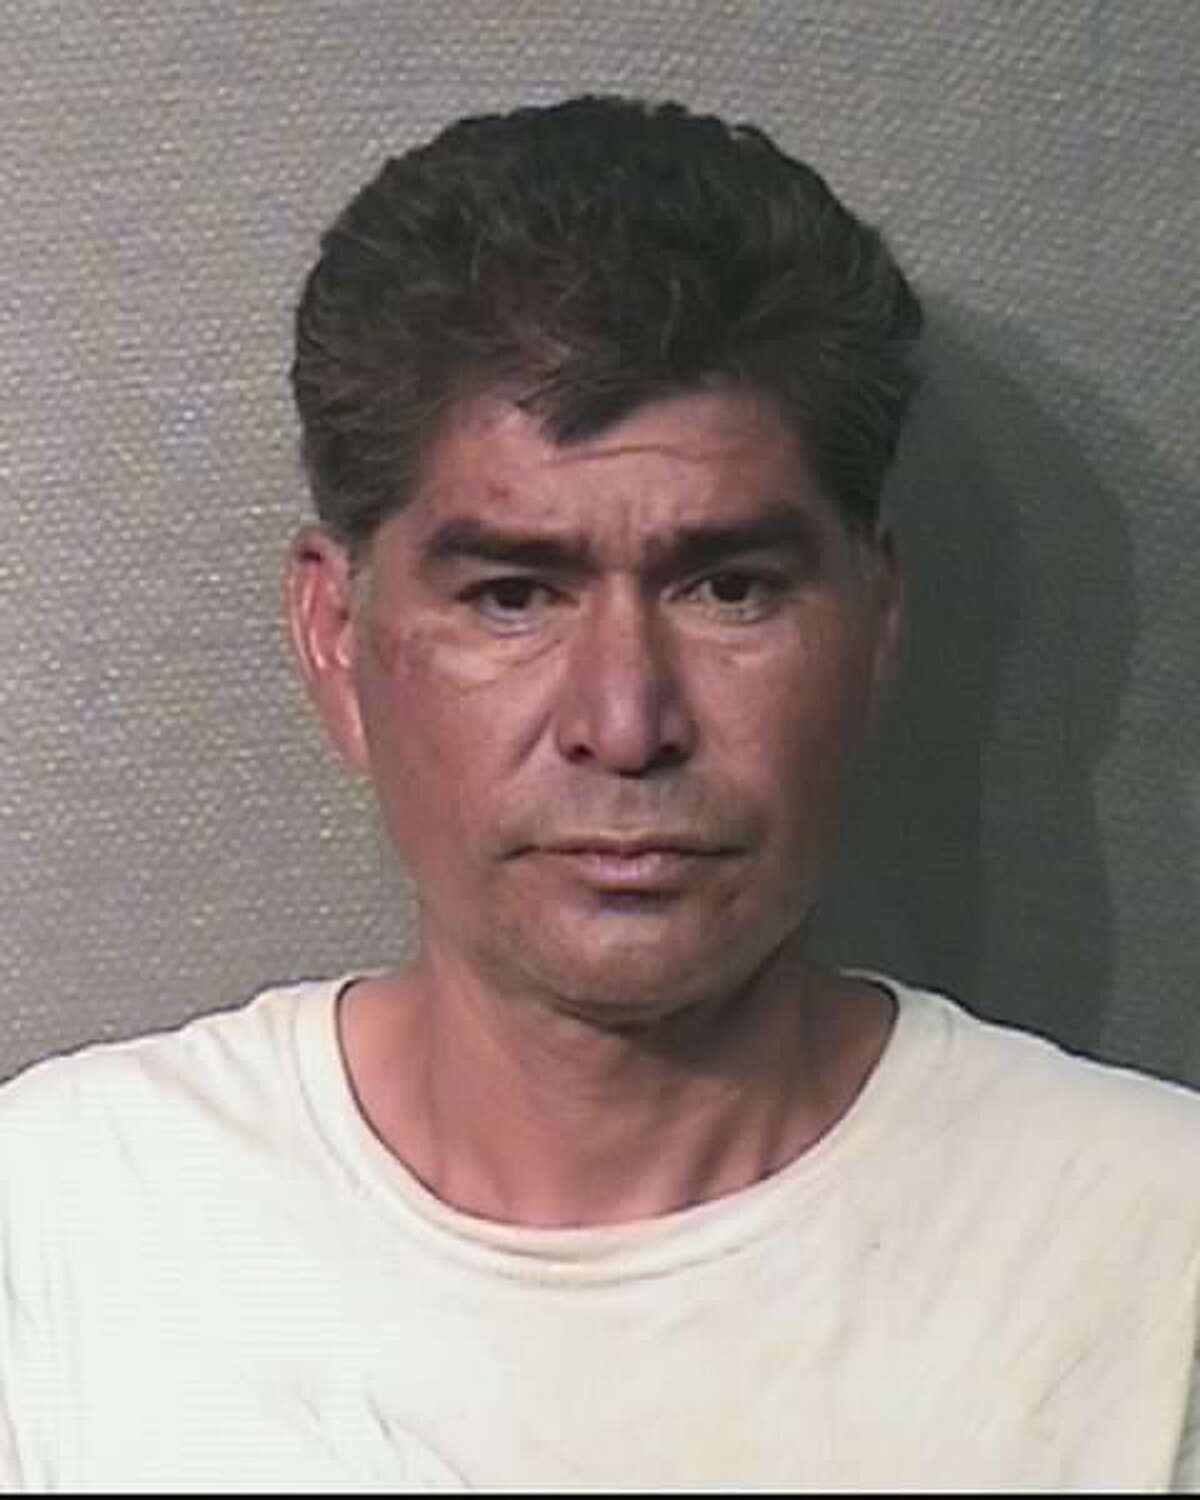 Miguel Angel Vazquez was arrested in August 2018 on a third charge of DWI.